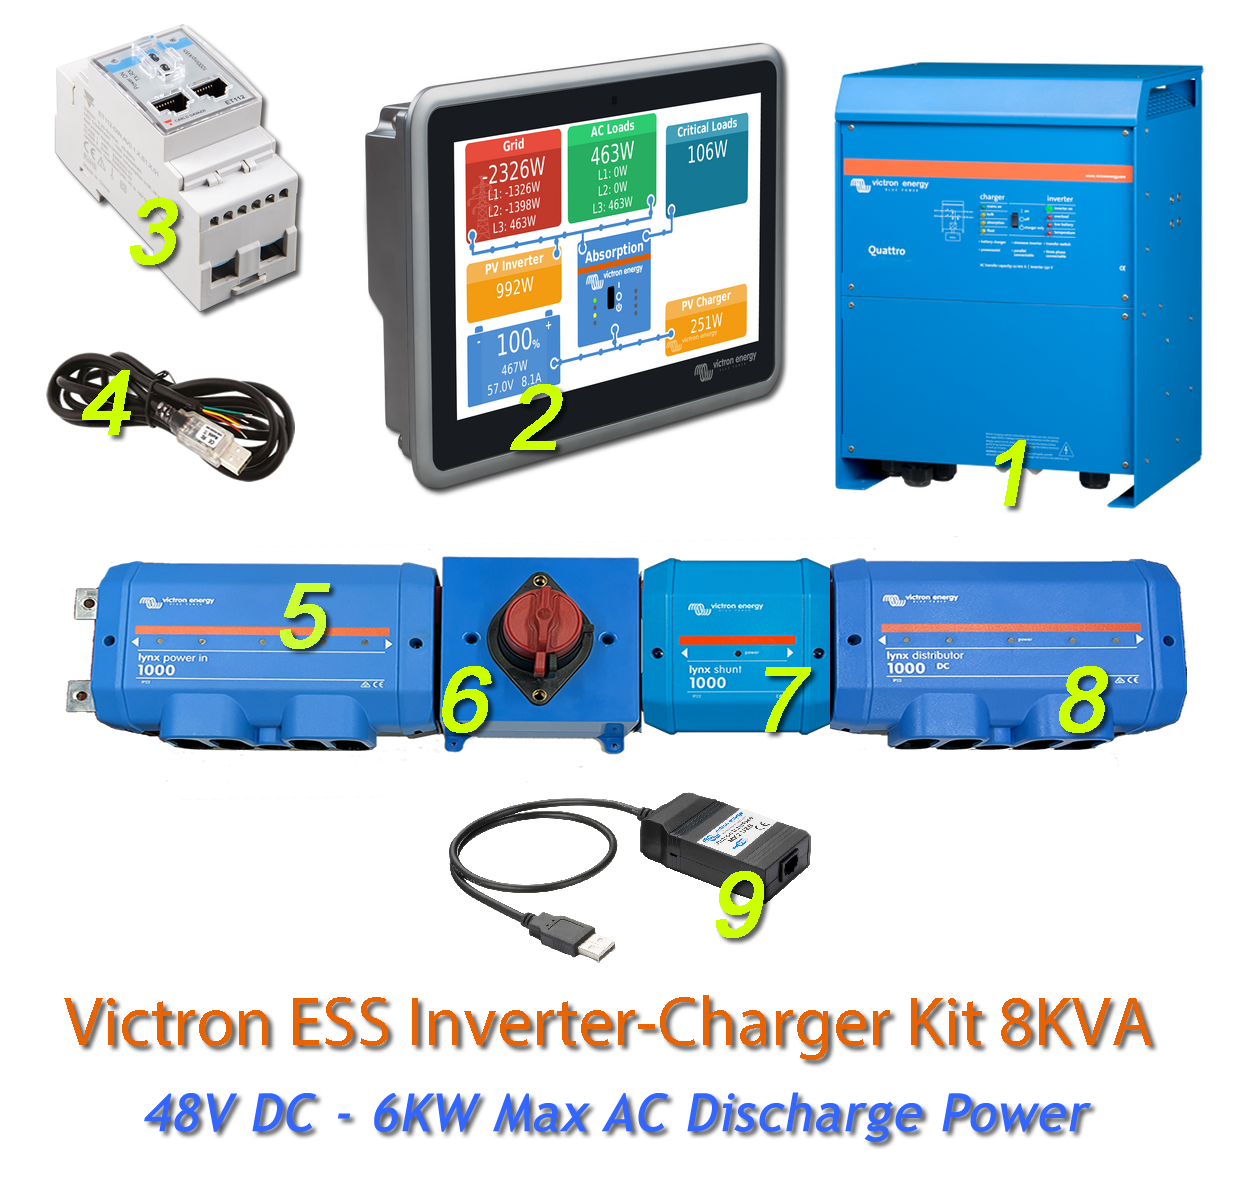 Victron Energy Quattro ESS Kit 48V DC - 6KW Max AC Discharge Power 110A Charging with Lynx system